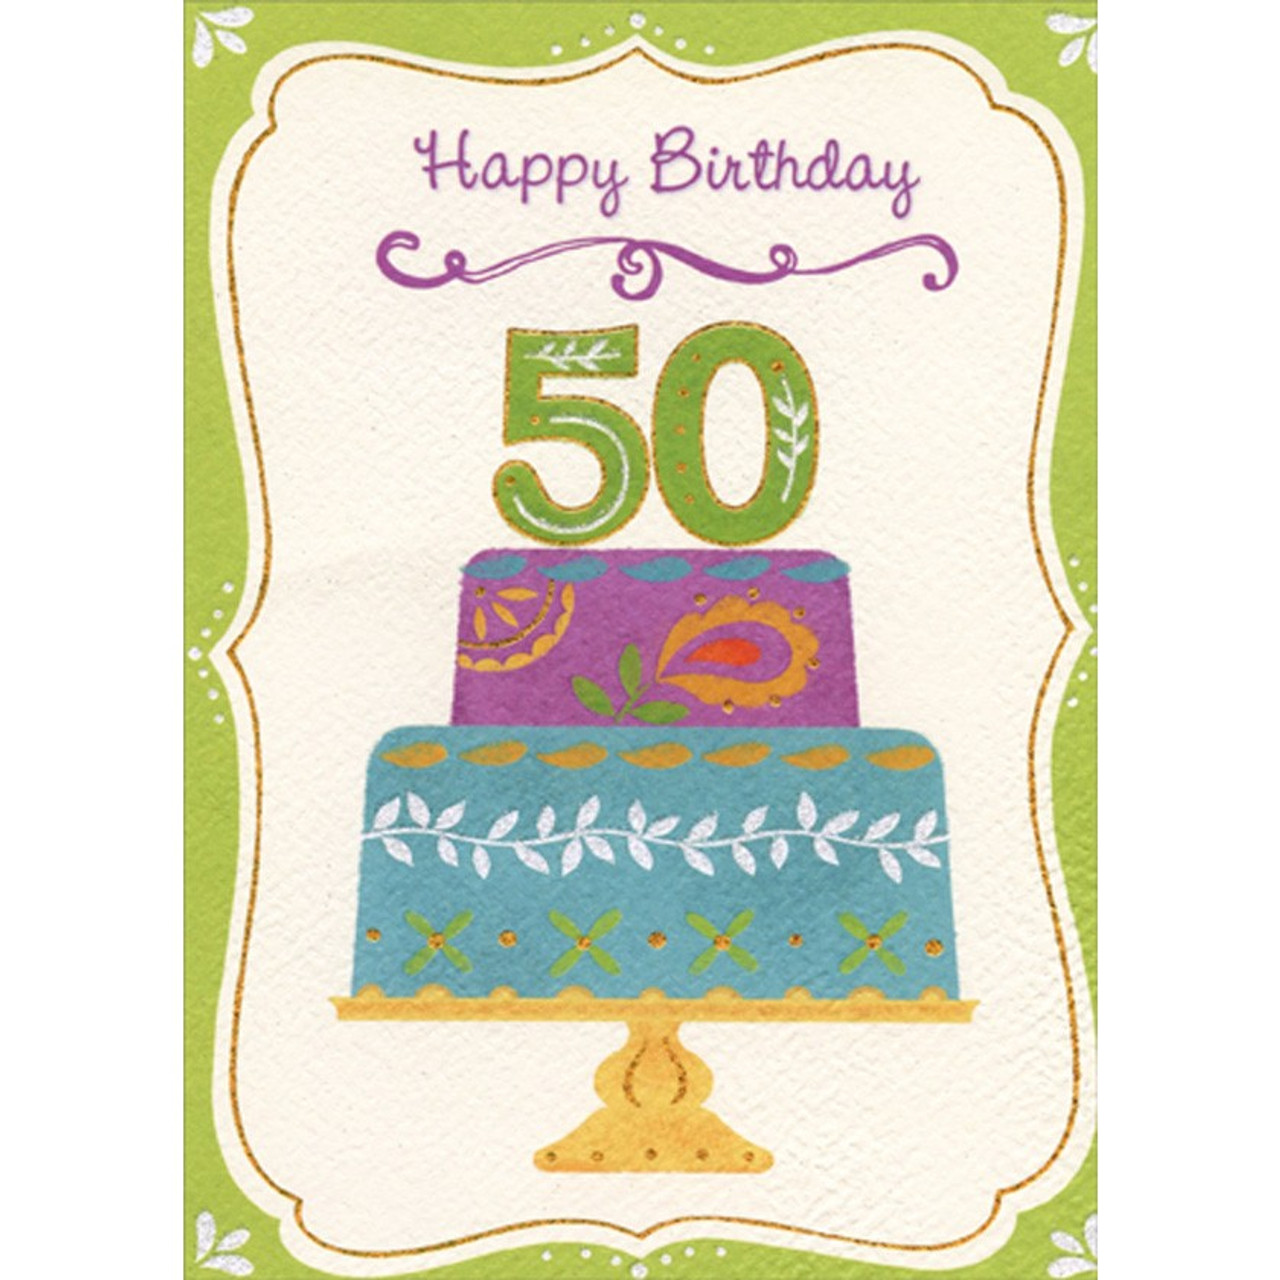 Purple and Blue Cake with Green Border Age 50 / 50th Birthday Card ...